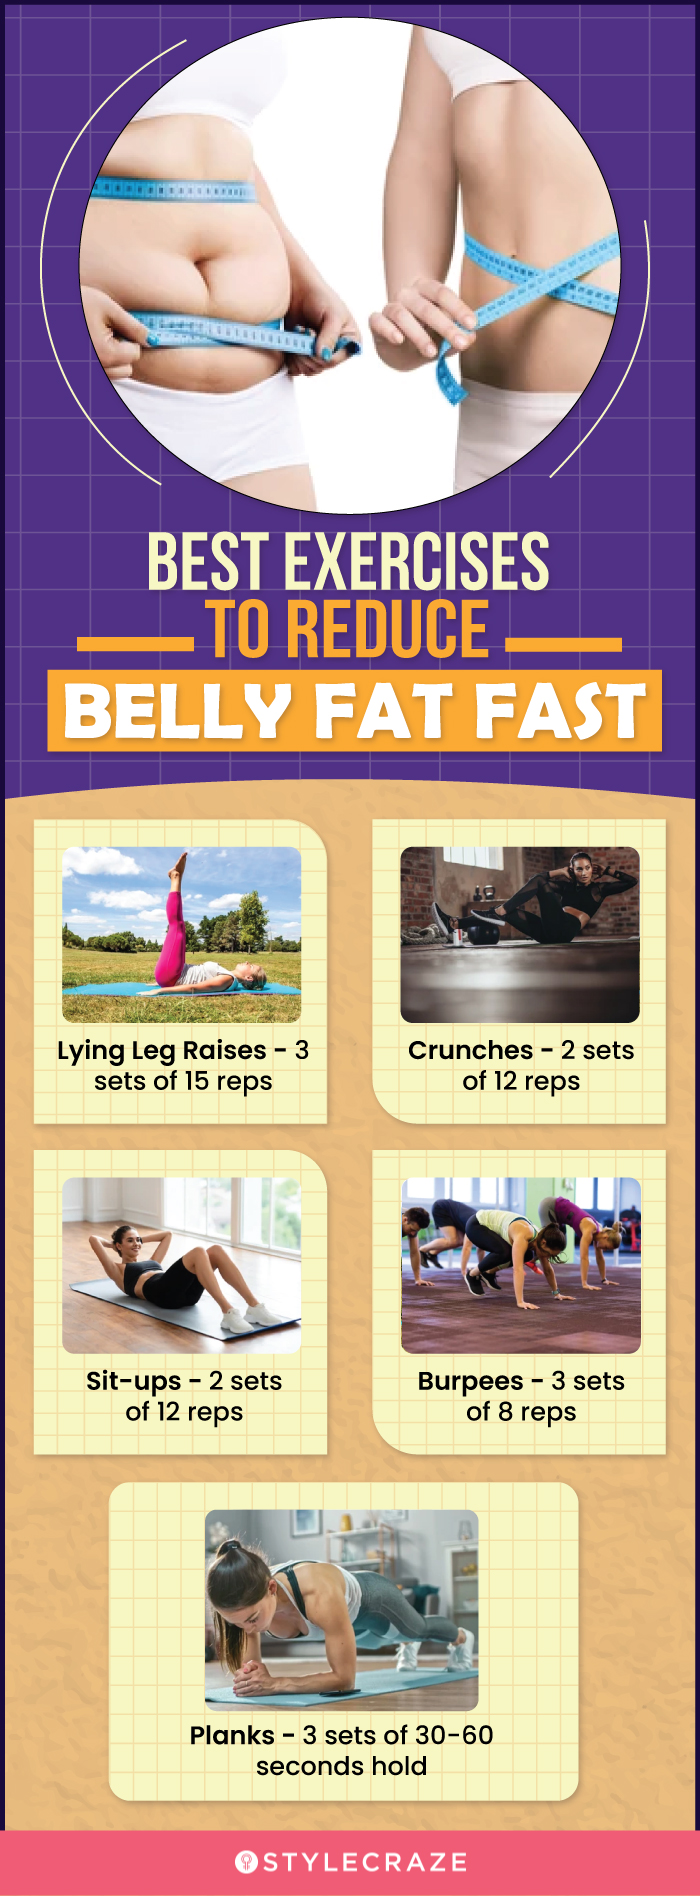 best exercises to reduce belly fat fast (infographic)